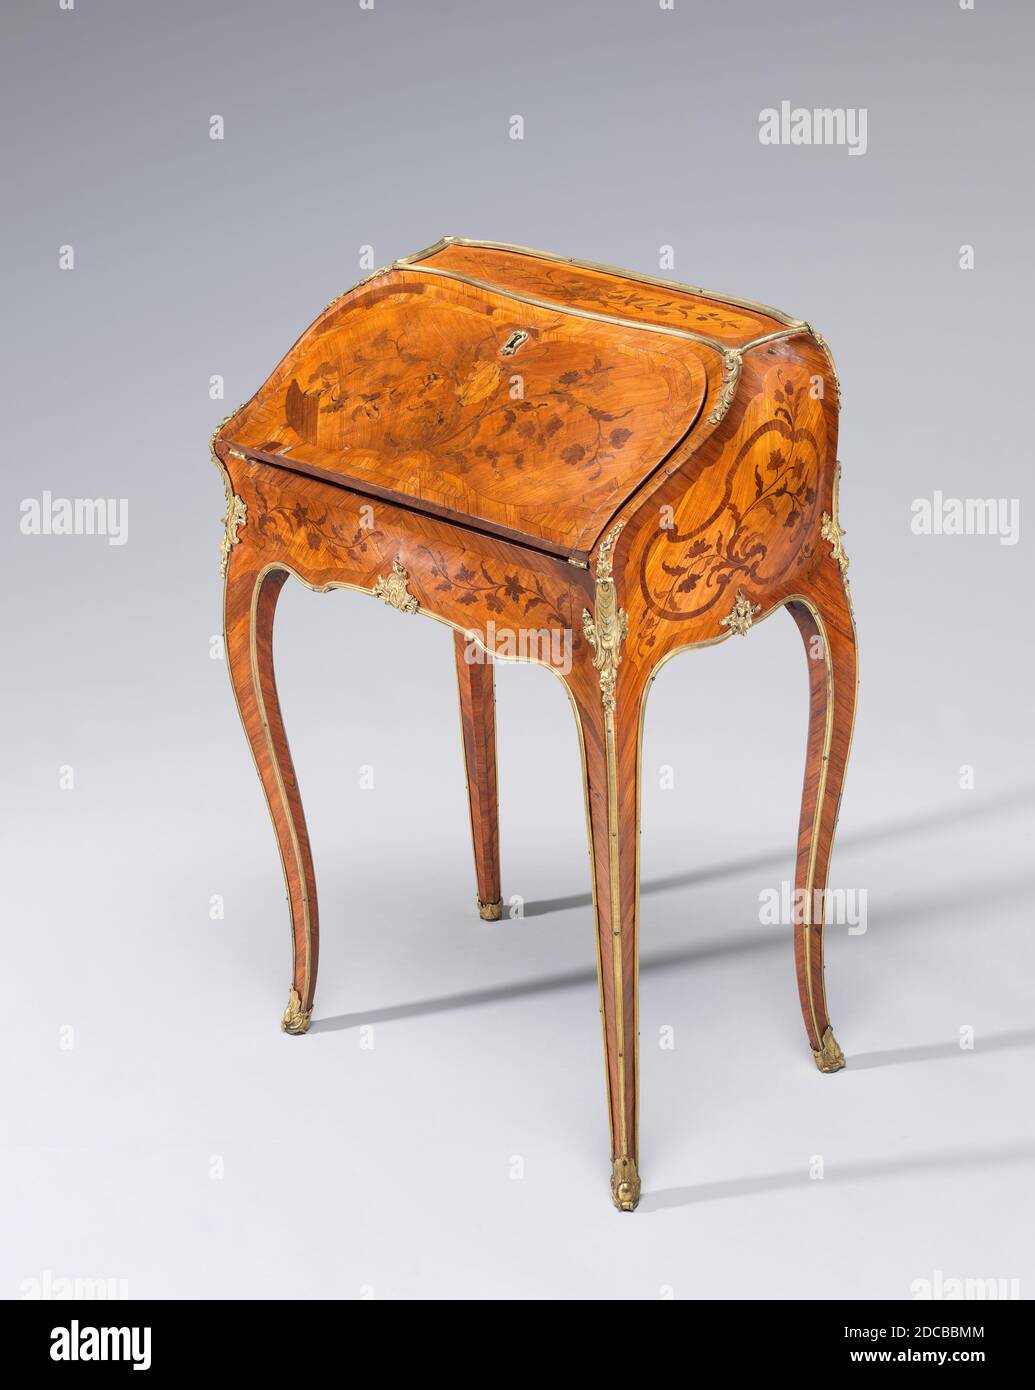 Bernard Vanrisamburgh II, (cabinetmaker), French, active c. 1730 - 1765/1766, Lean-to Writing Desk (secrétaire en pente), c. 1750, veneered on oak (stained purple on the underside of the top) with tulipwood cut on the quarter, root-cut kingwood, and other end-cut woods; gilded bronze mounts, overall: 80 x 53.3 x 35.8 cm (31 1/2 x 21 x 14 1/8 in Stock Photo